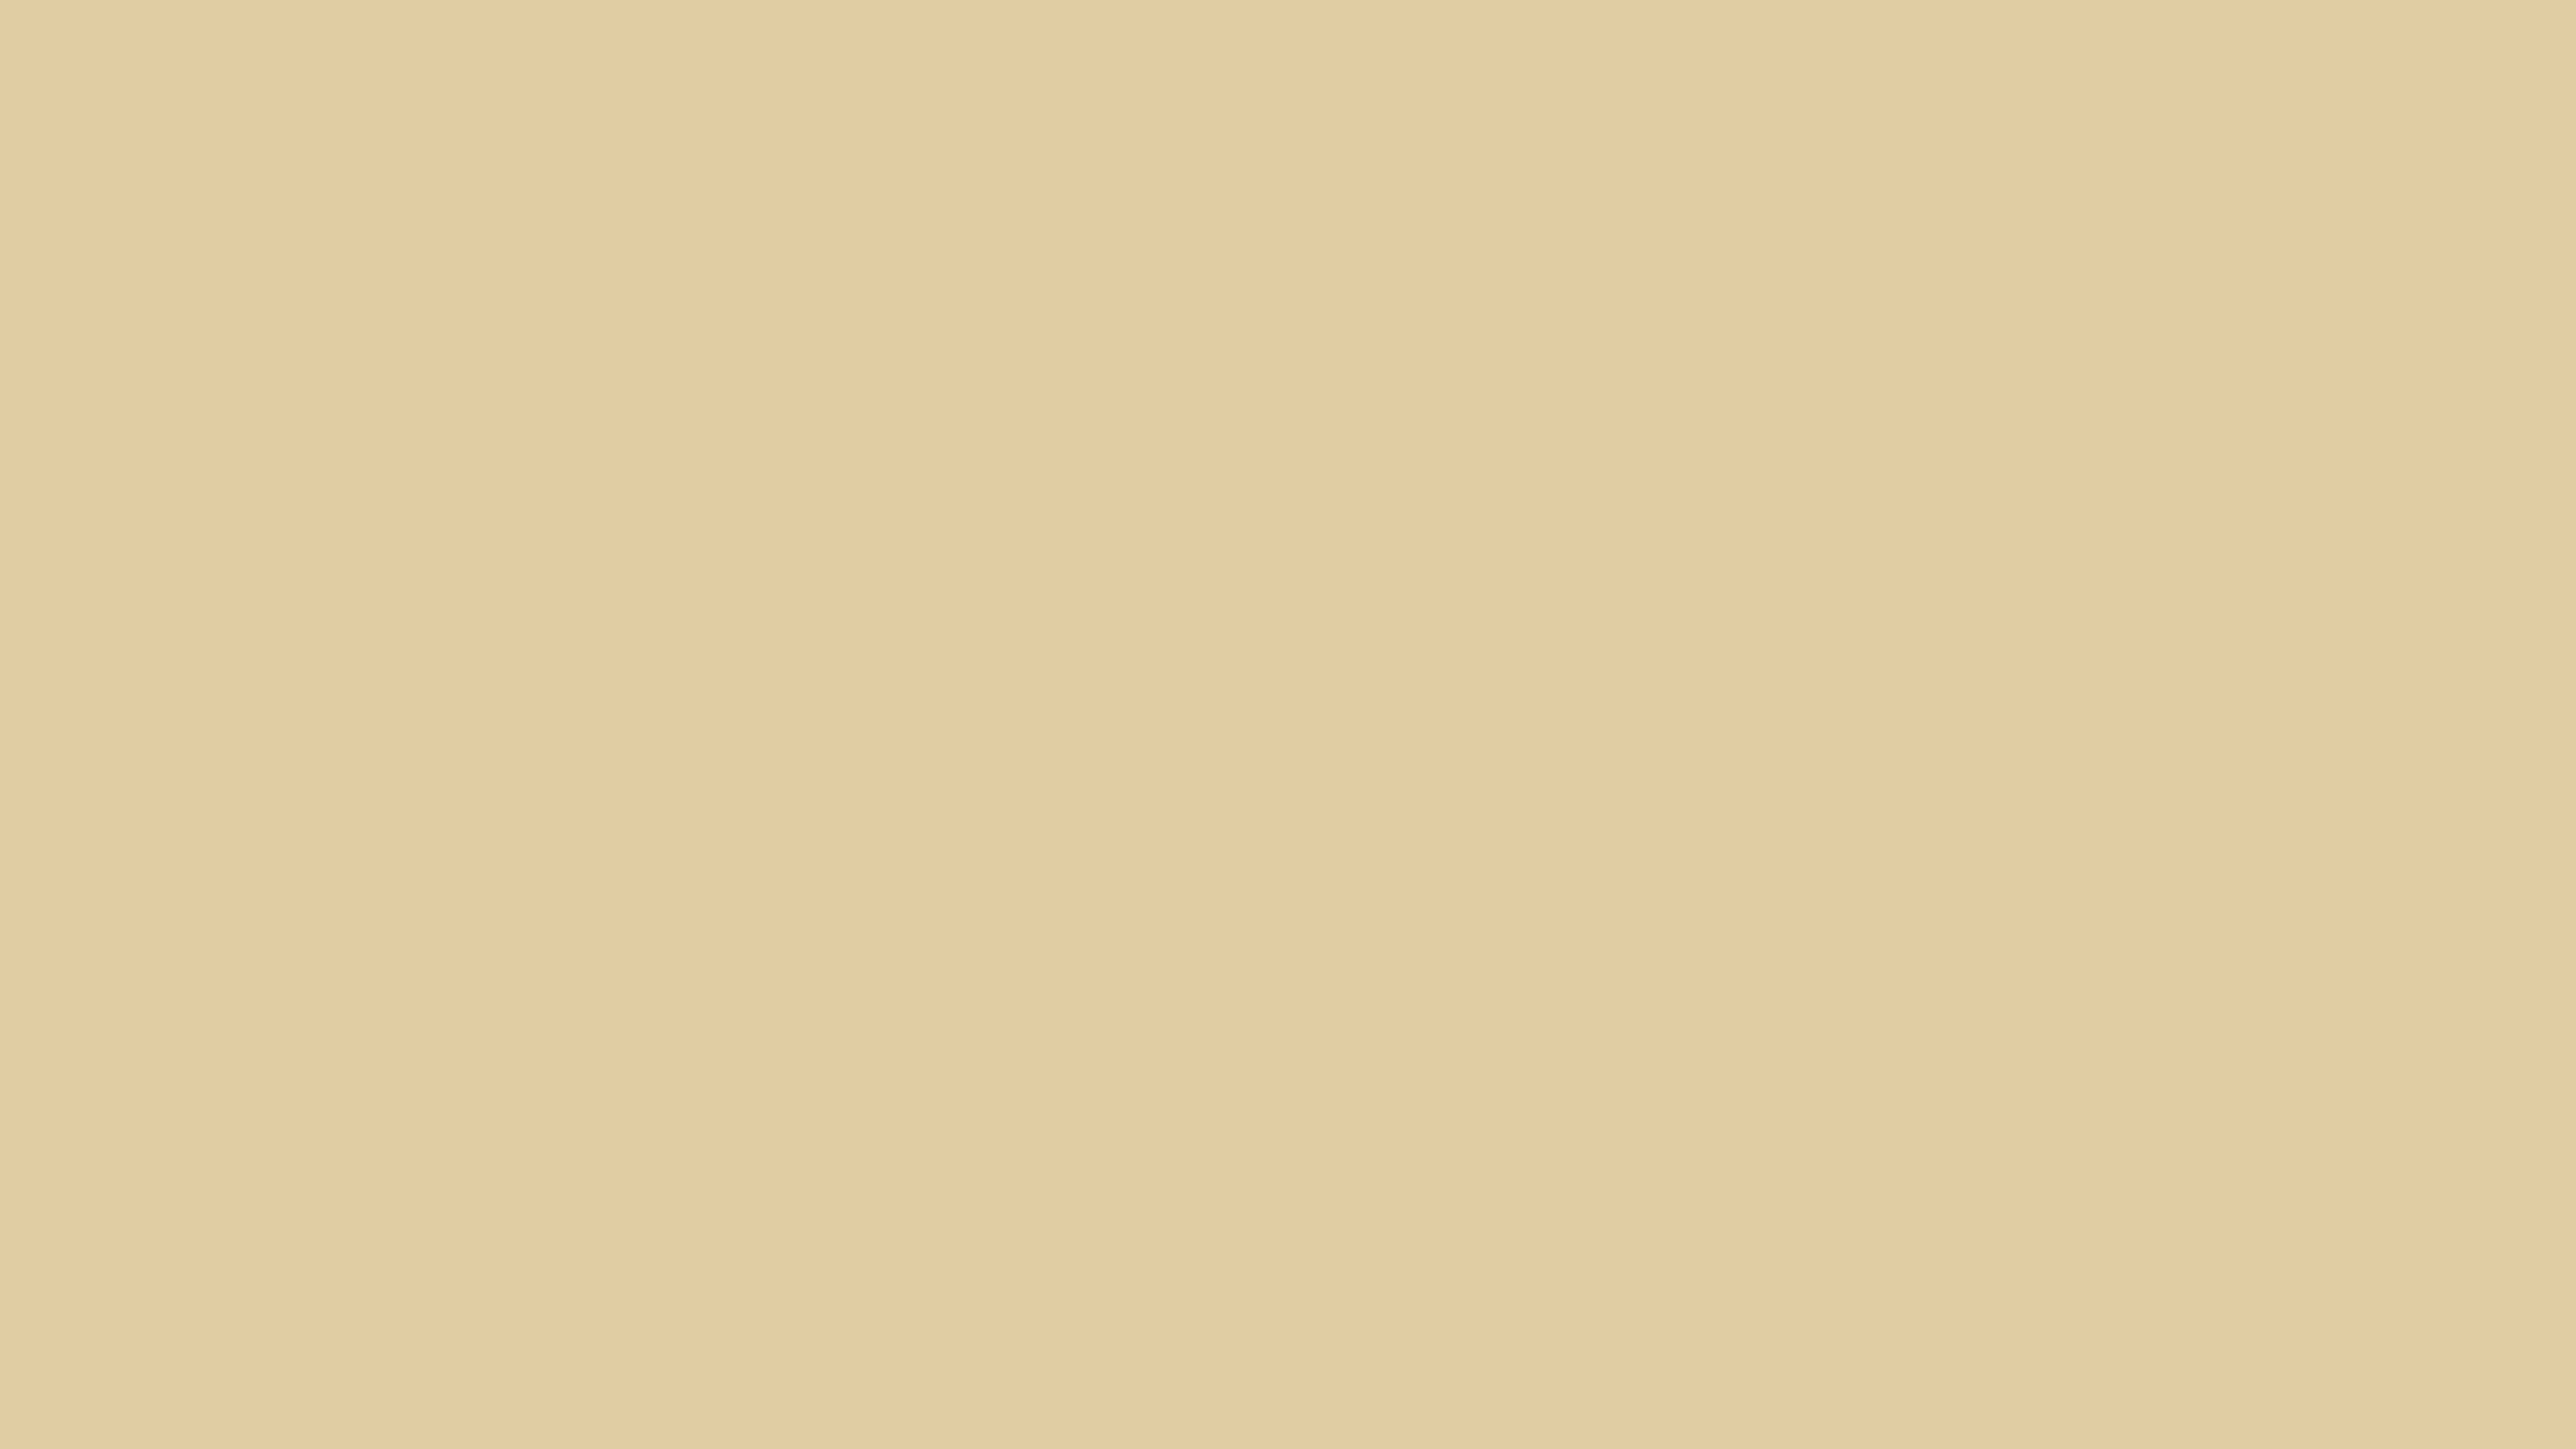 Organic Bamboo Solid Color Background Image | Free Image Generator